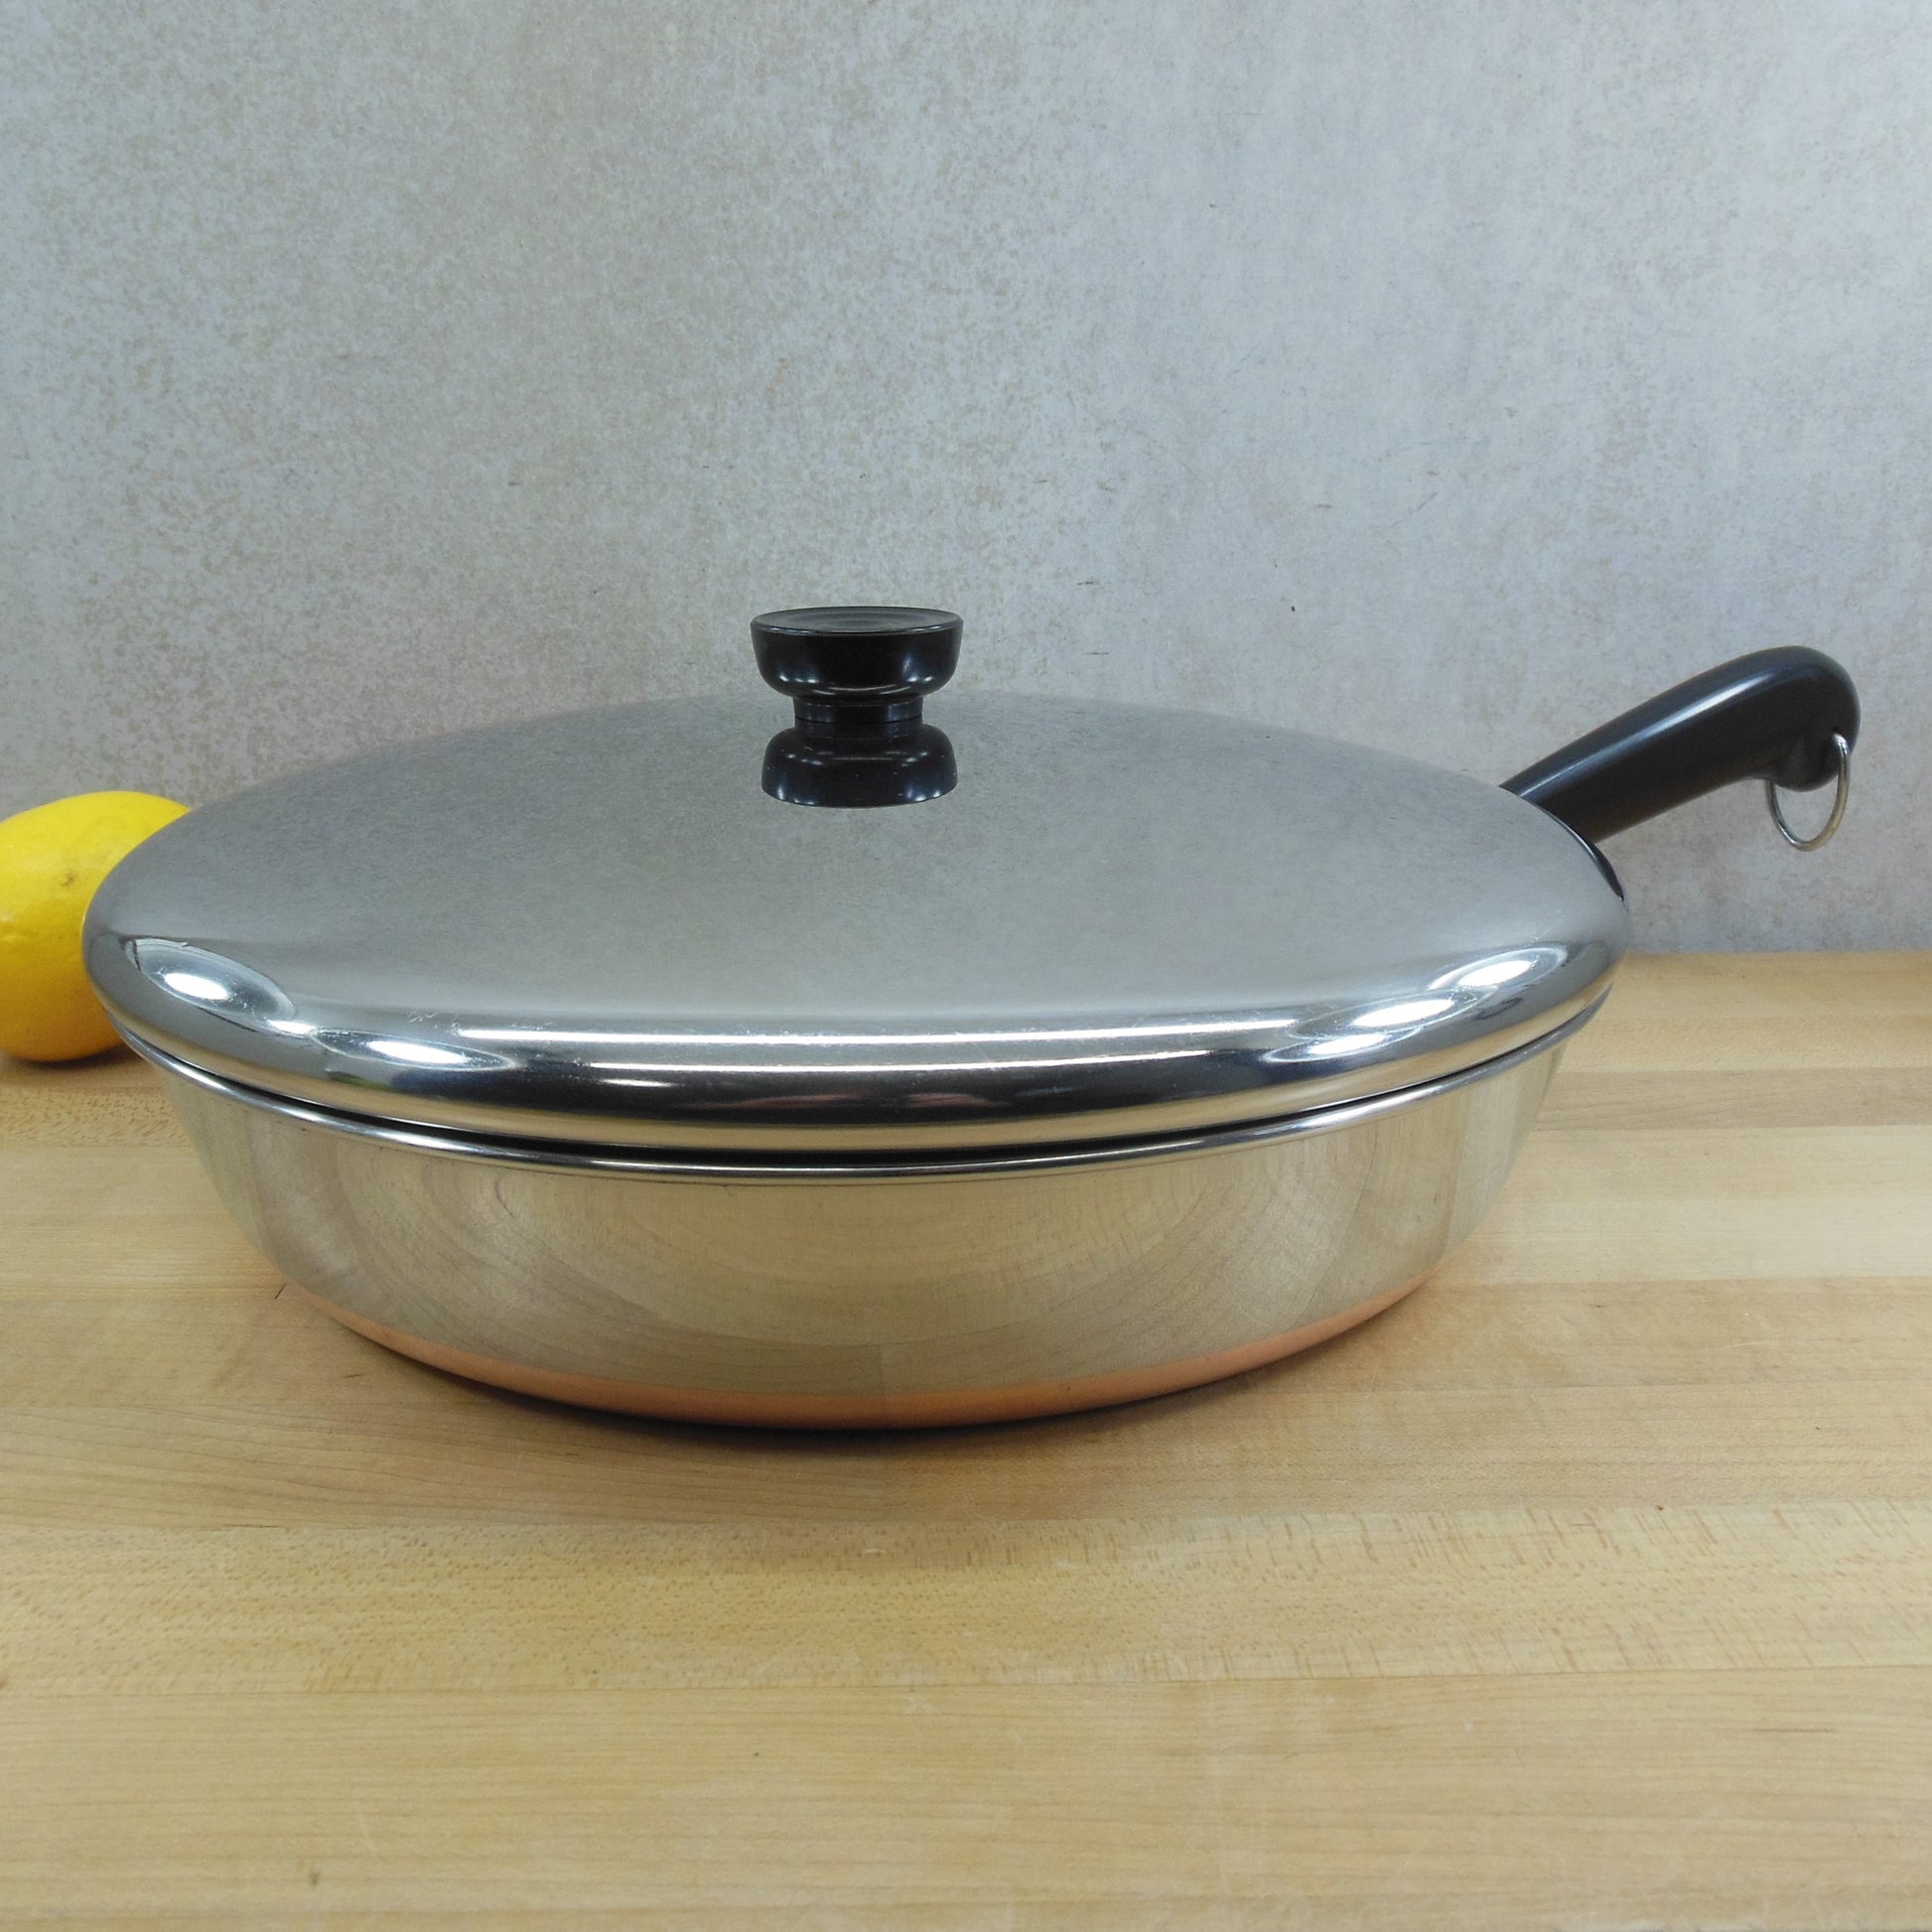 Revere Ware 12" Fry Pan Skillet Chicken Fryer Stainless Copper Clad 1994